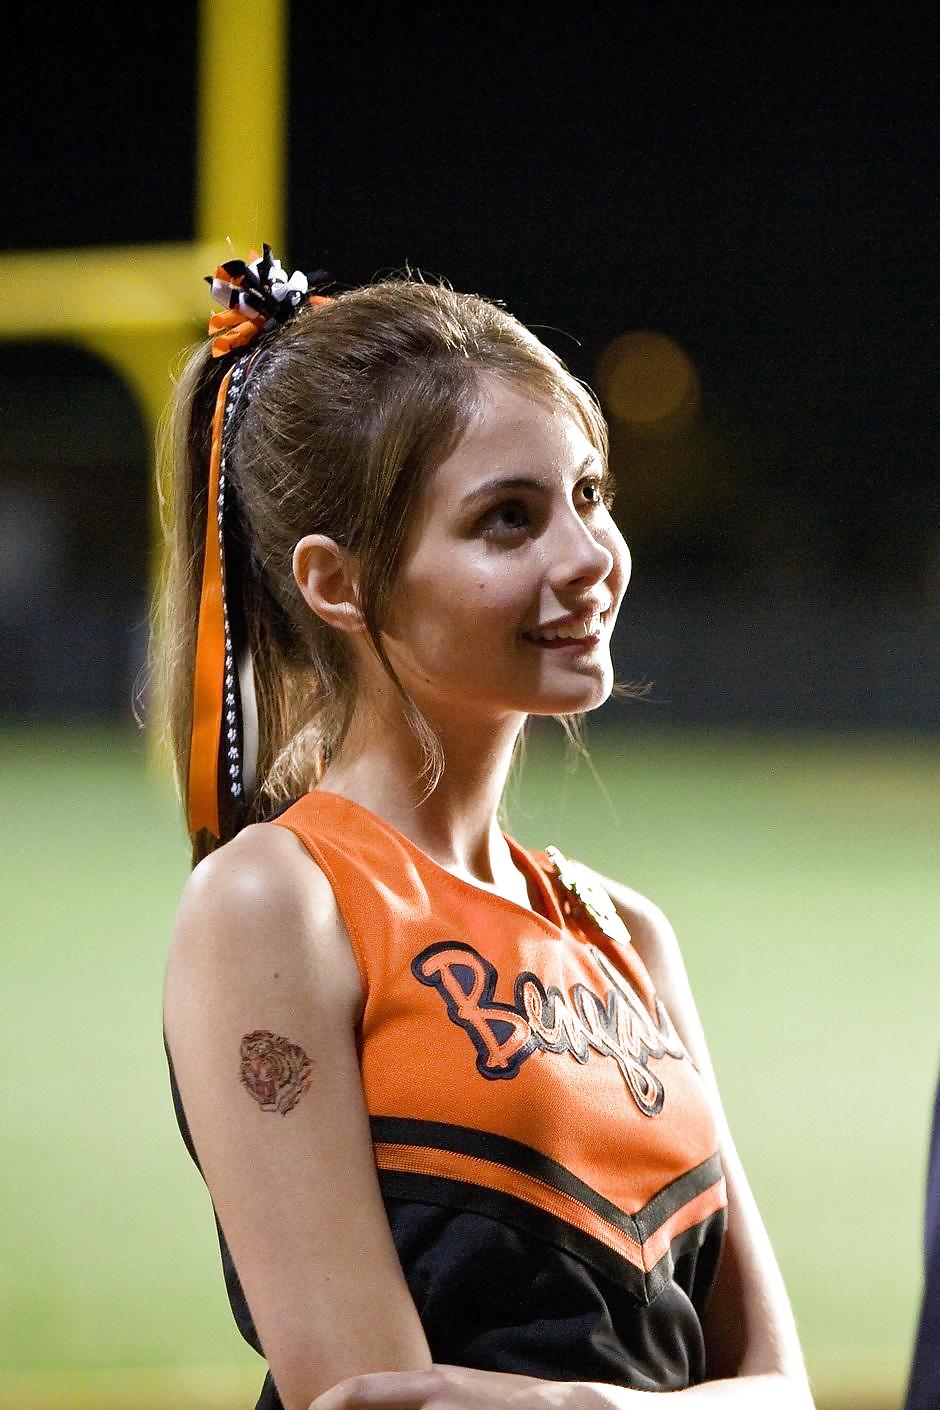 Willa holland (hotest young celebrity) for fan :) 
 #15420414